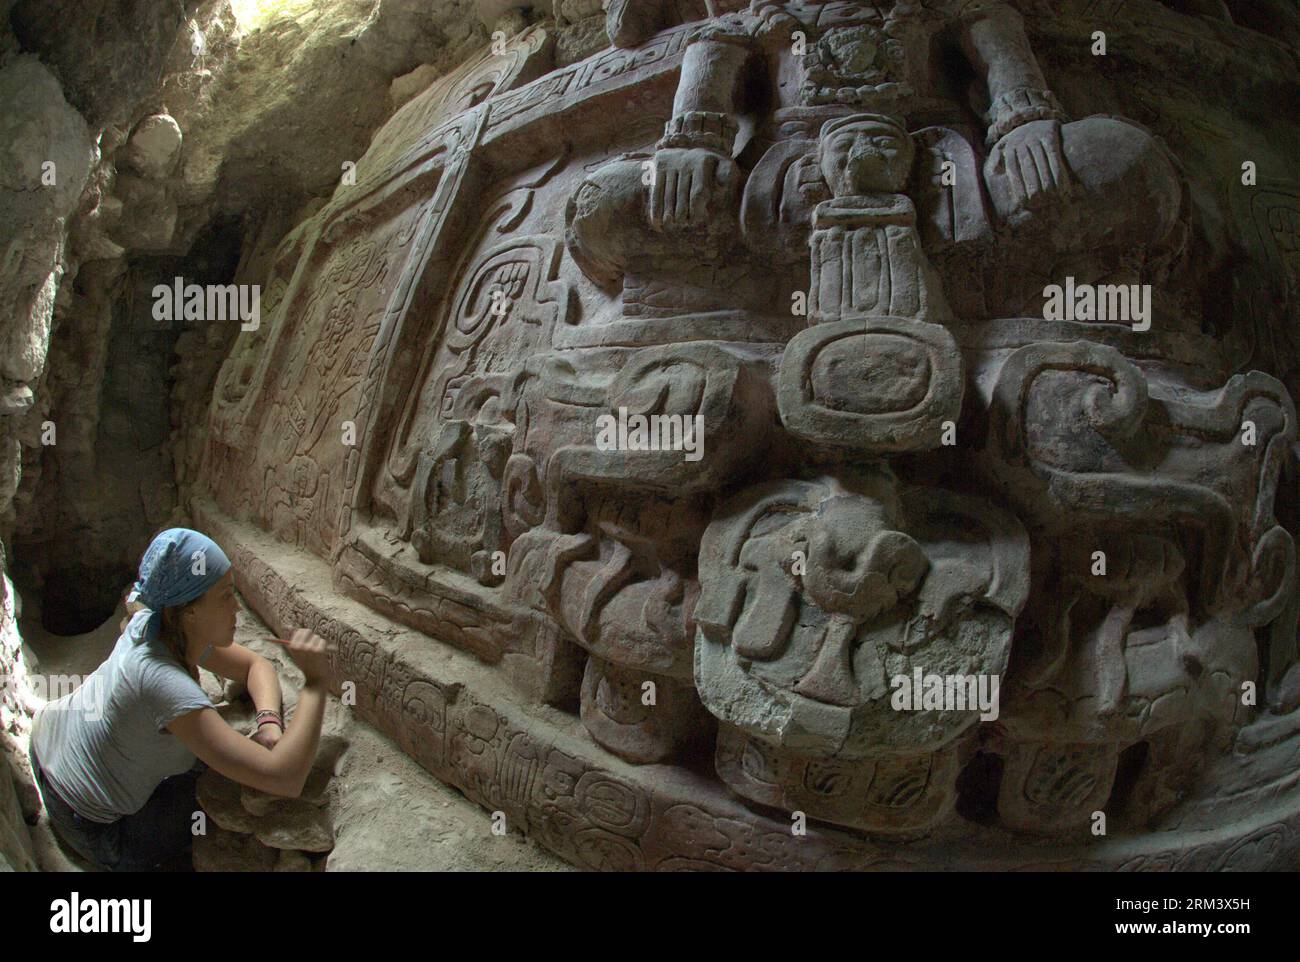 Bildnummer: 60337518  Datum: 07.08.2013  Copyright: imago/Xinhua An image provided by Holmul Archaeological Project shows a woman working on Holmul s Frieze, discovered in the Holmul Precolumbian Archaeological Center, in Peten department, of Guatemala City, capital of Guatemala, on Aug. 7, 2013. The frieze of the Maya culture, has 8 meters length and 2 meters high, and it is the most spectacular thing ever seen, according to the Holmul Archaeological Poject. (Xinhua/Holmul Archaeological Project/Harvard University) GUATEMALA-PETEN-ARCHAEOLOGY-DISCOVERY PUBLICATIONxNOTxINxCHN xns x0x 2013 quer Stock Photo